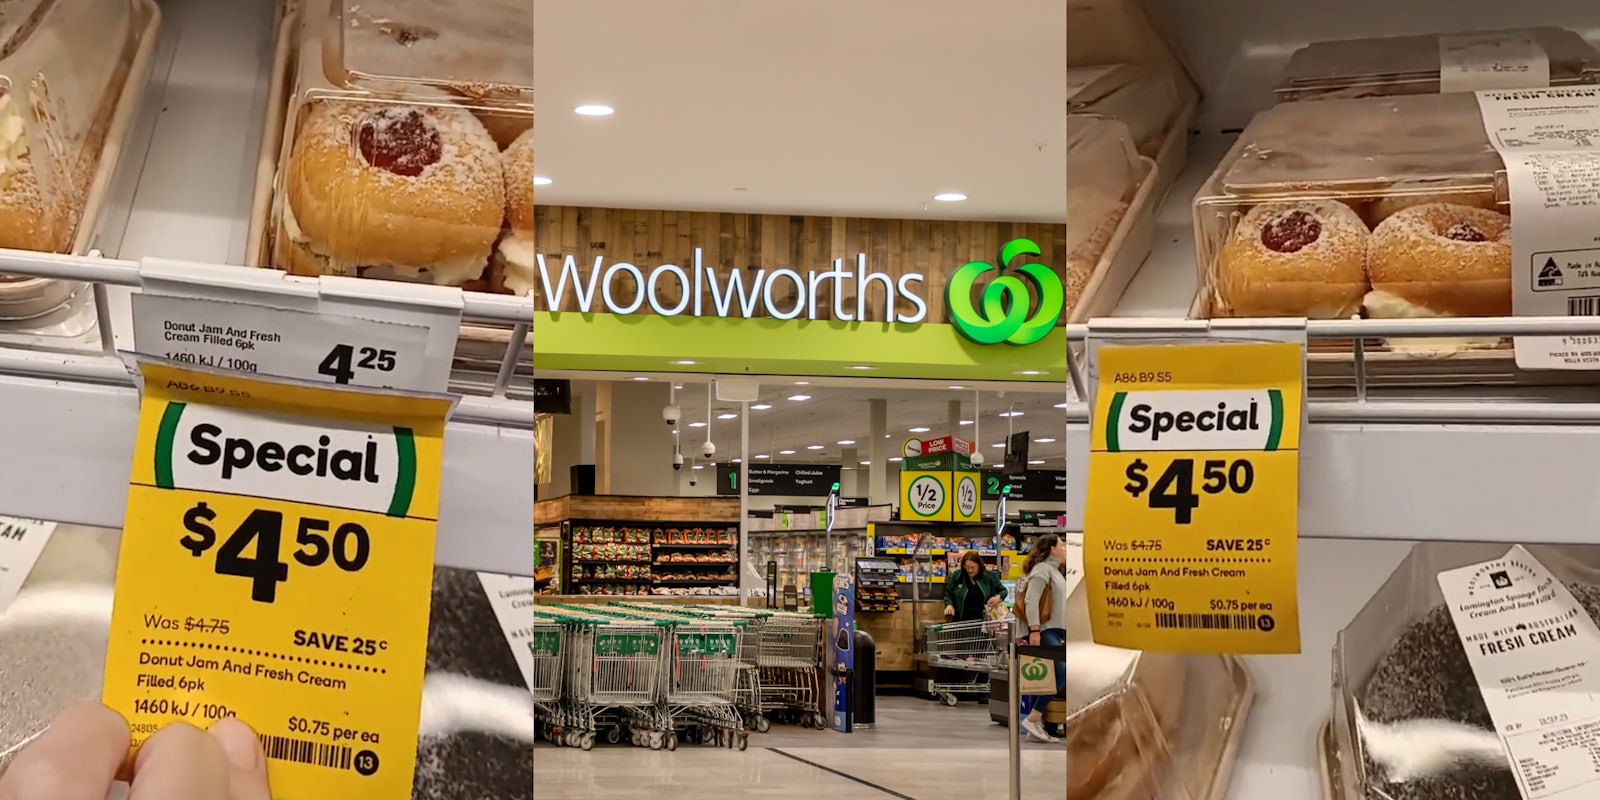 customer holding back special $4.50 tag on item to reveal $4.25 tag underneath (l) Woolworths entrance with sign (c) desert with $4.50 price tag (r)